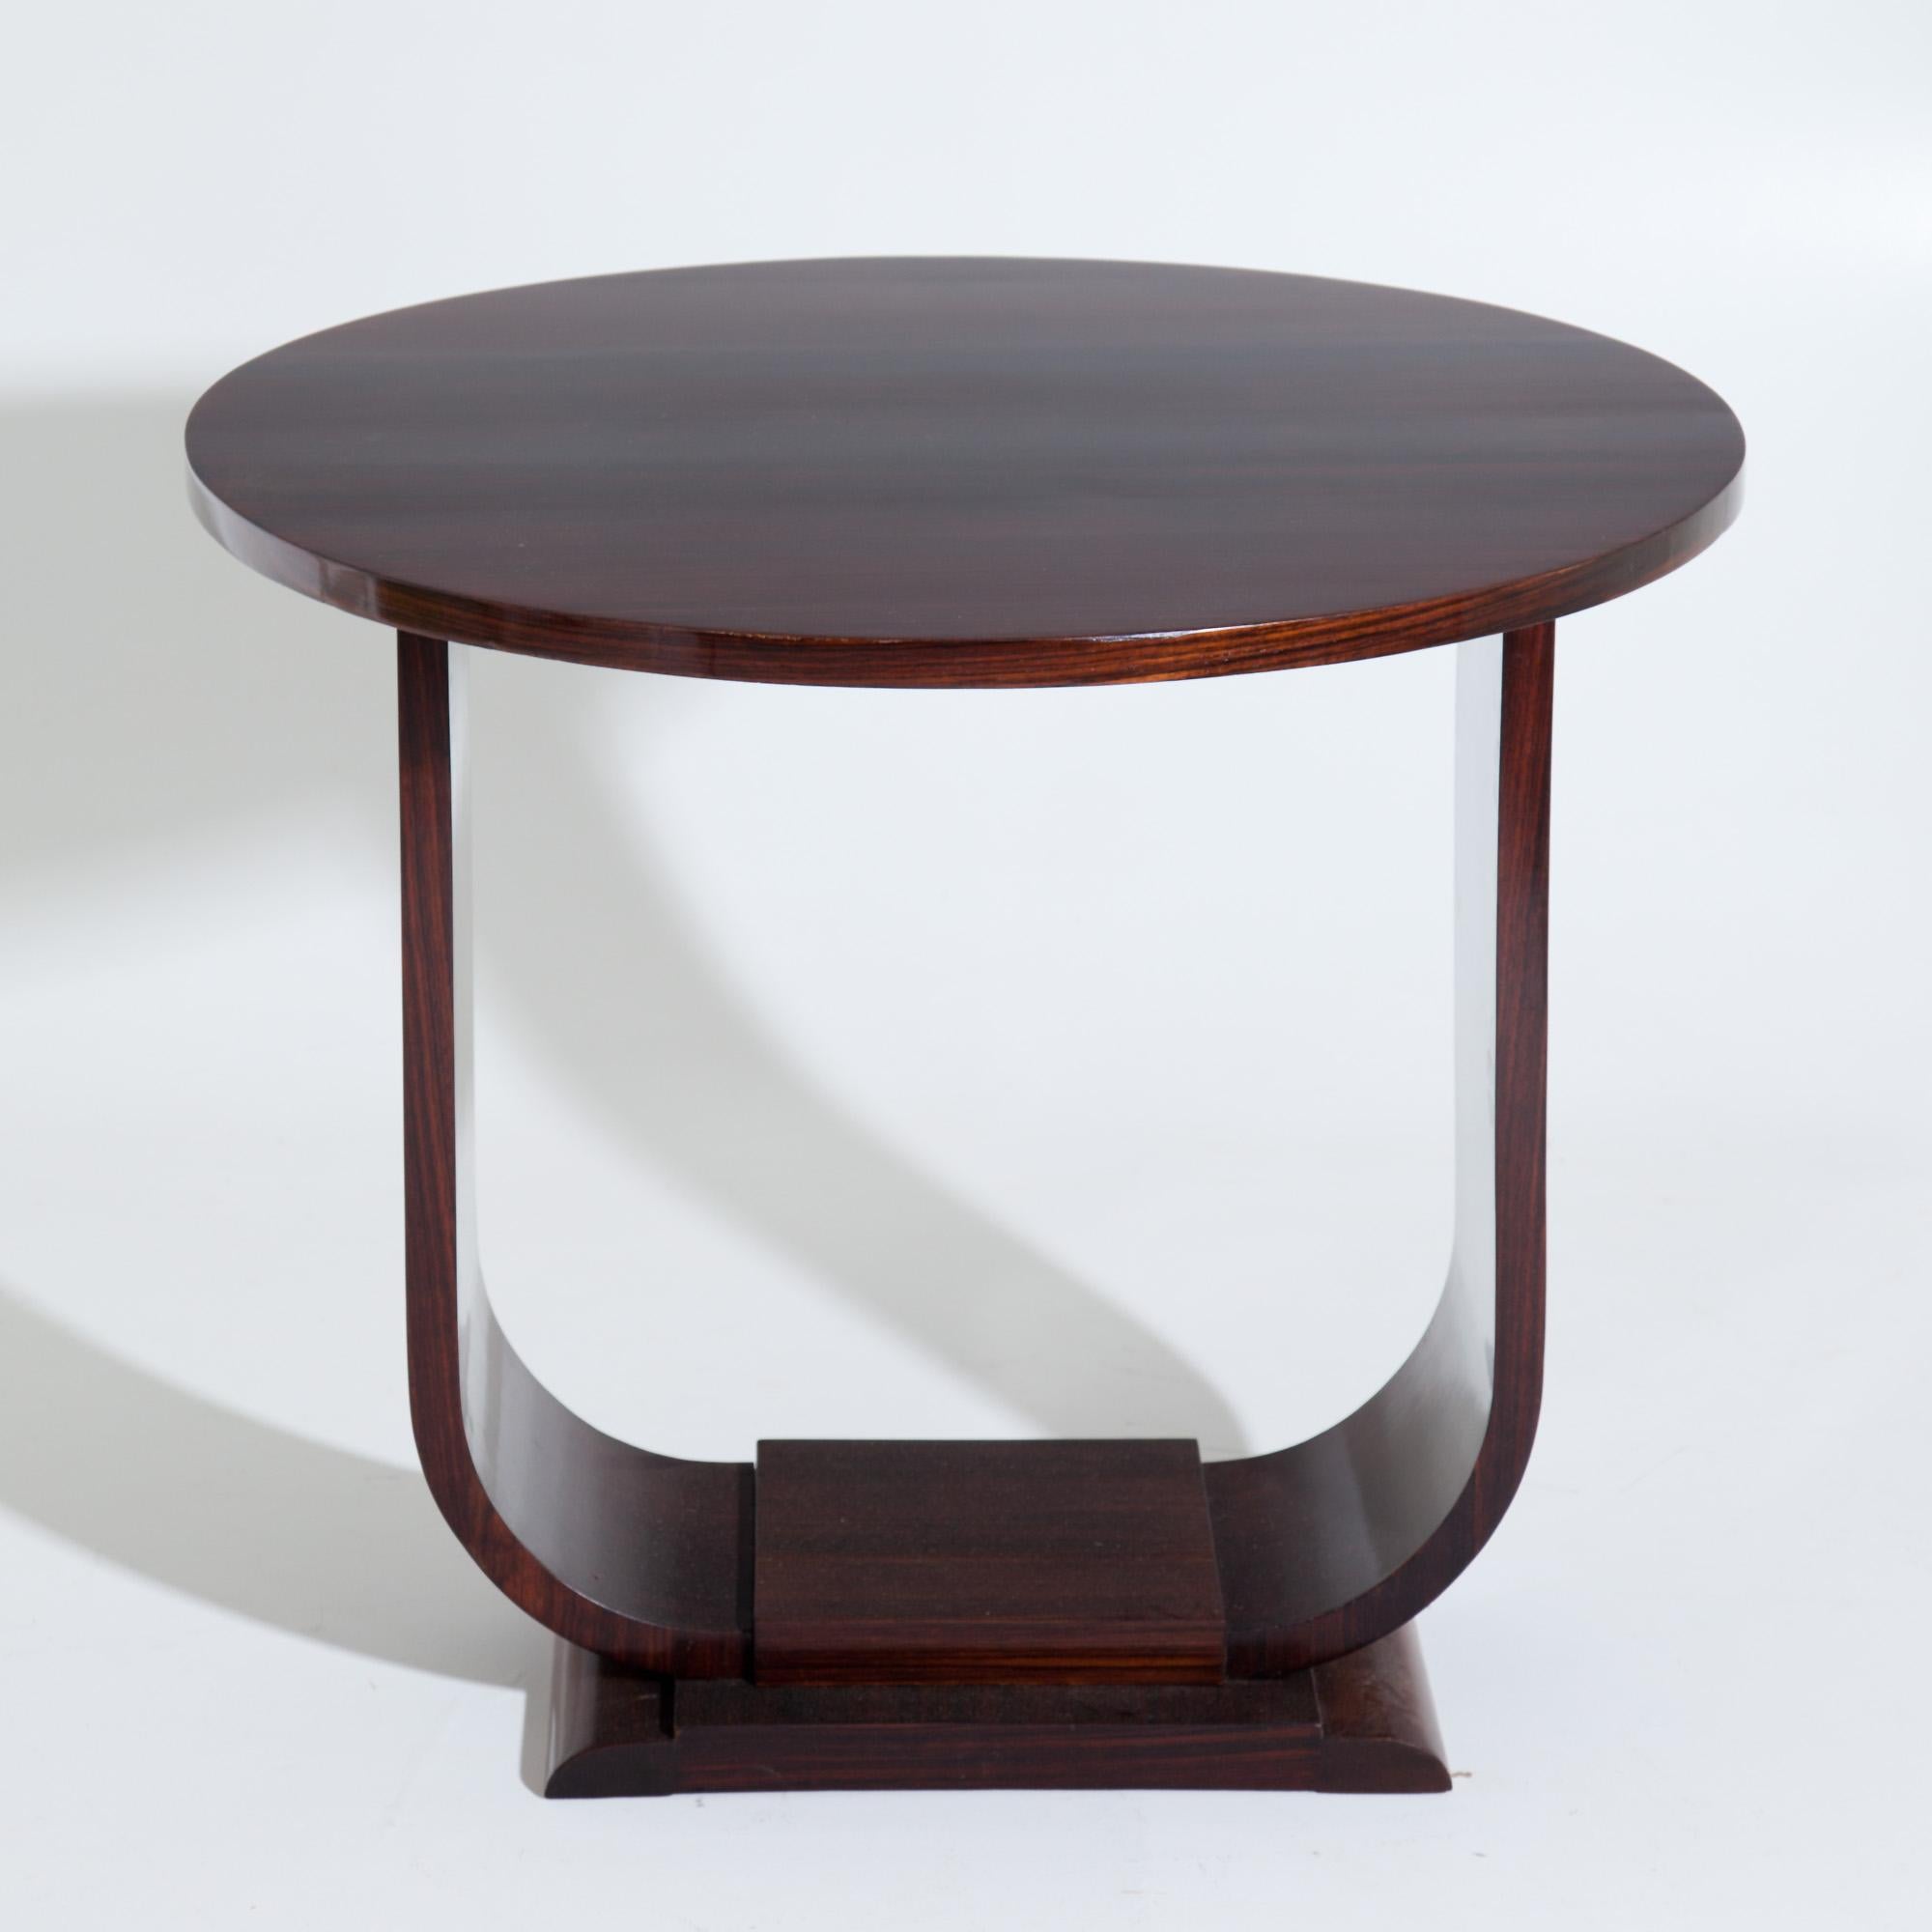 Art Deco table with round table top on U-shaped stand. Expertly prepared condition.